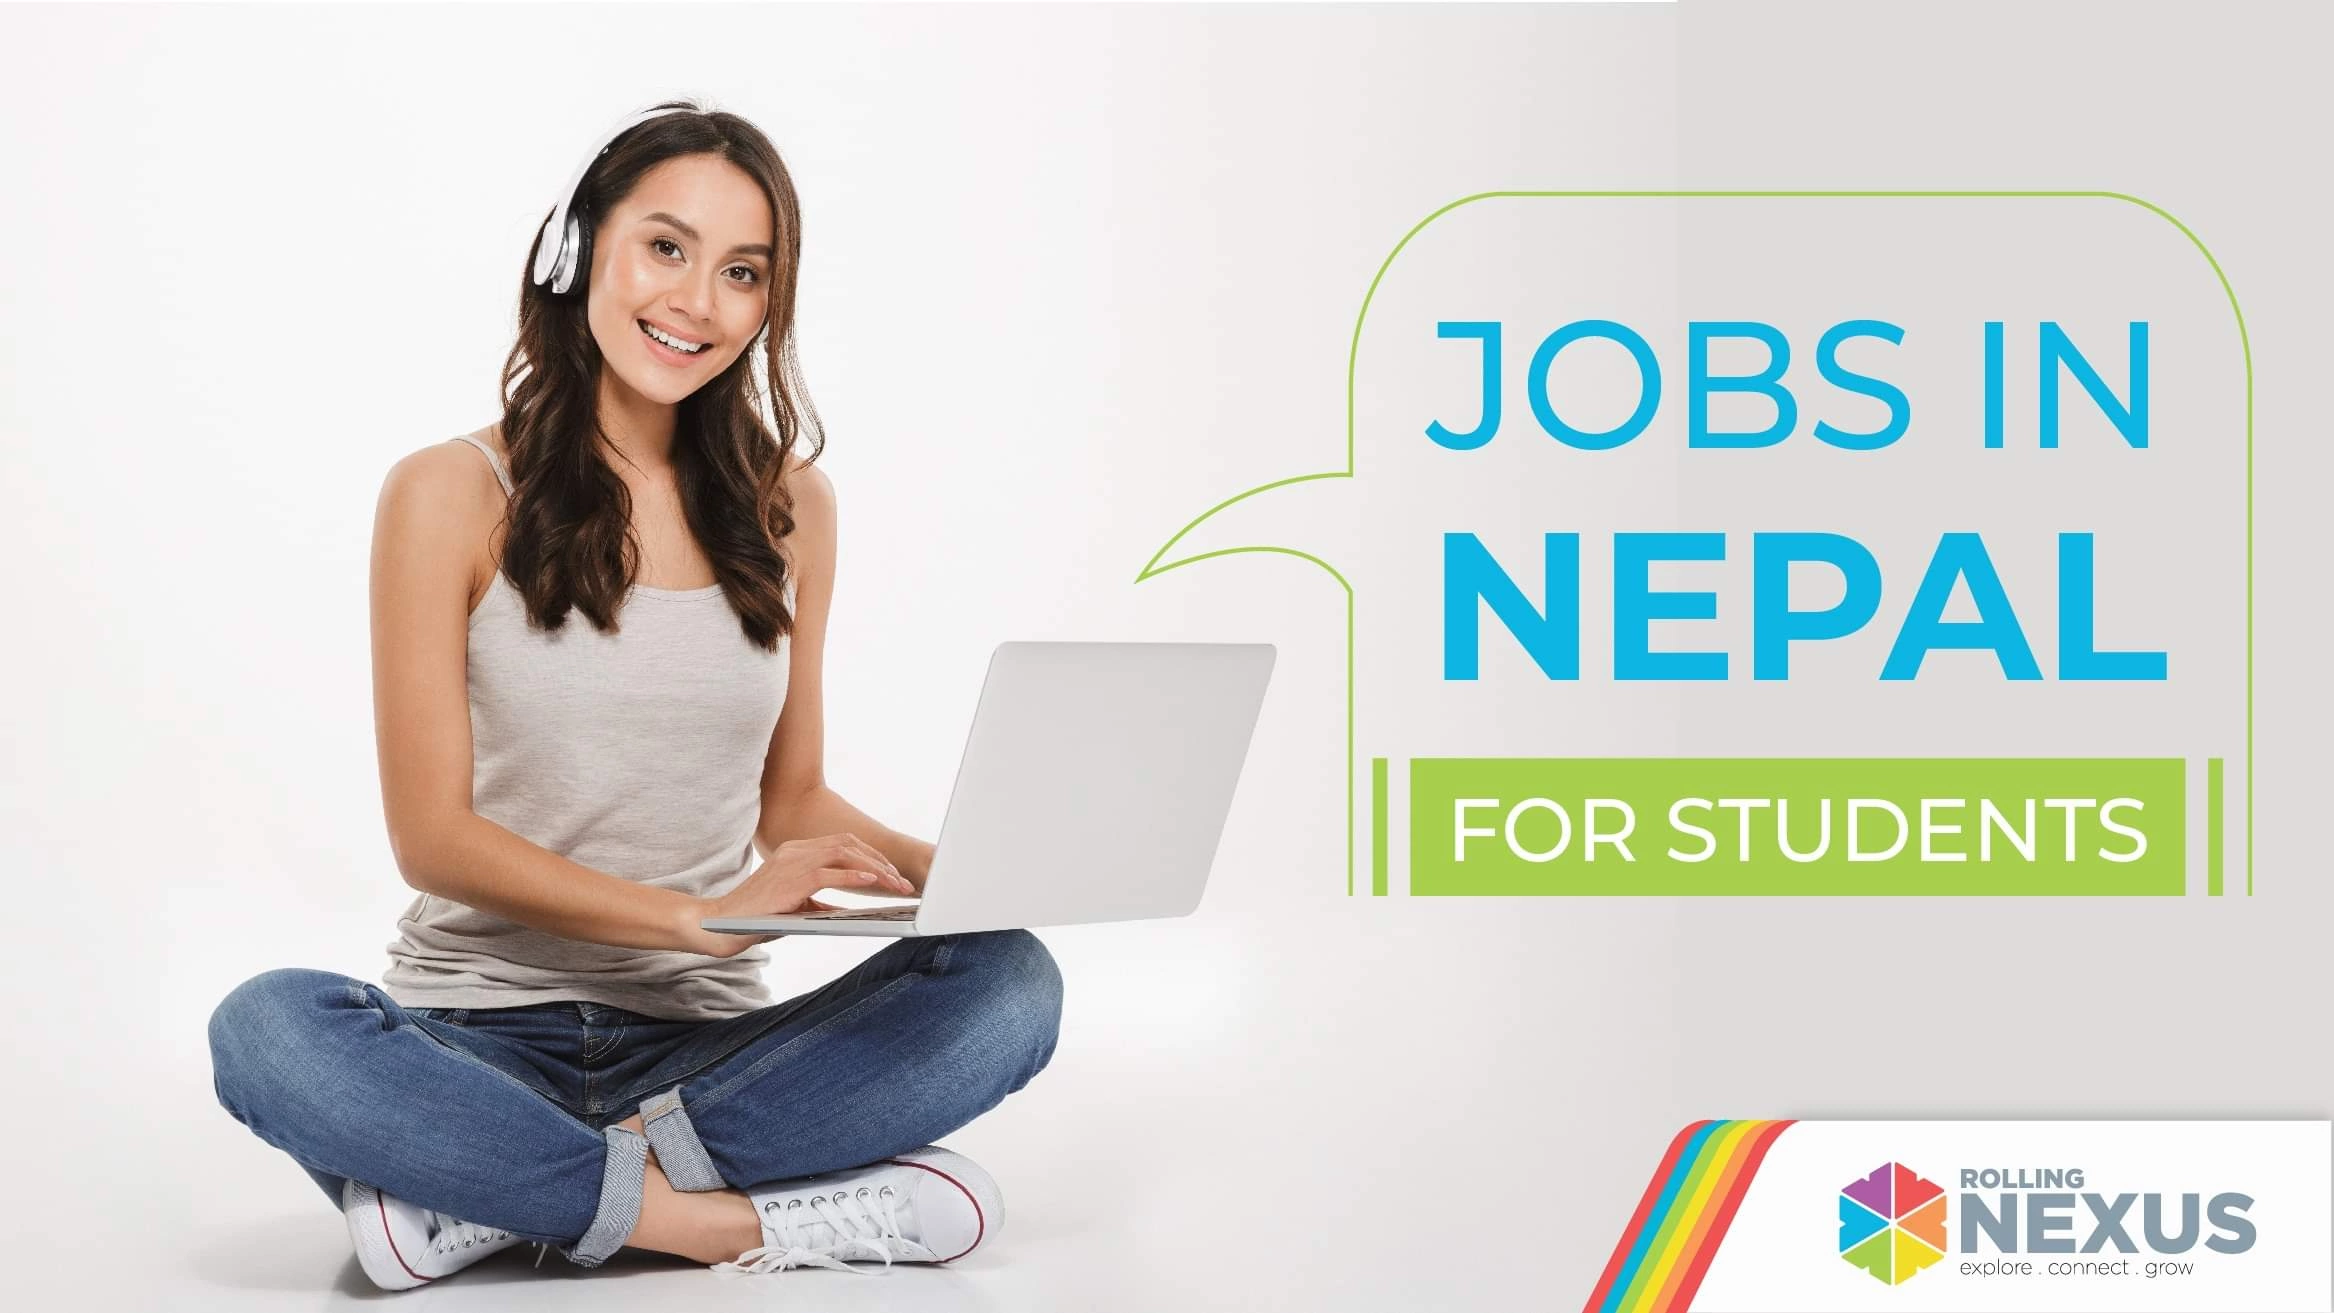 Jobs in Nepal for students